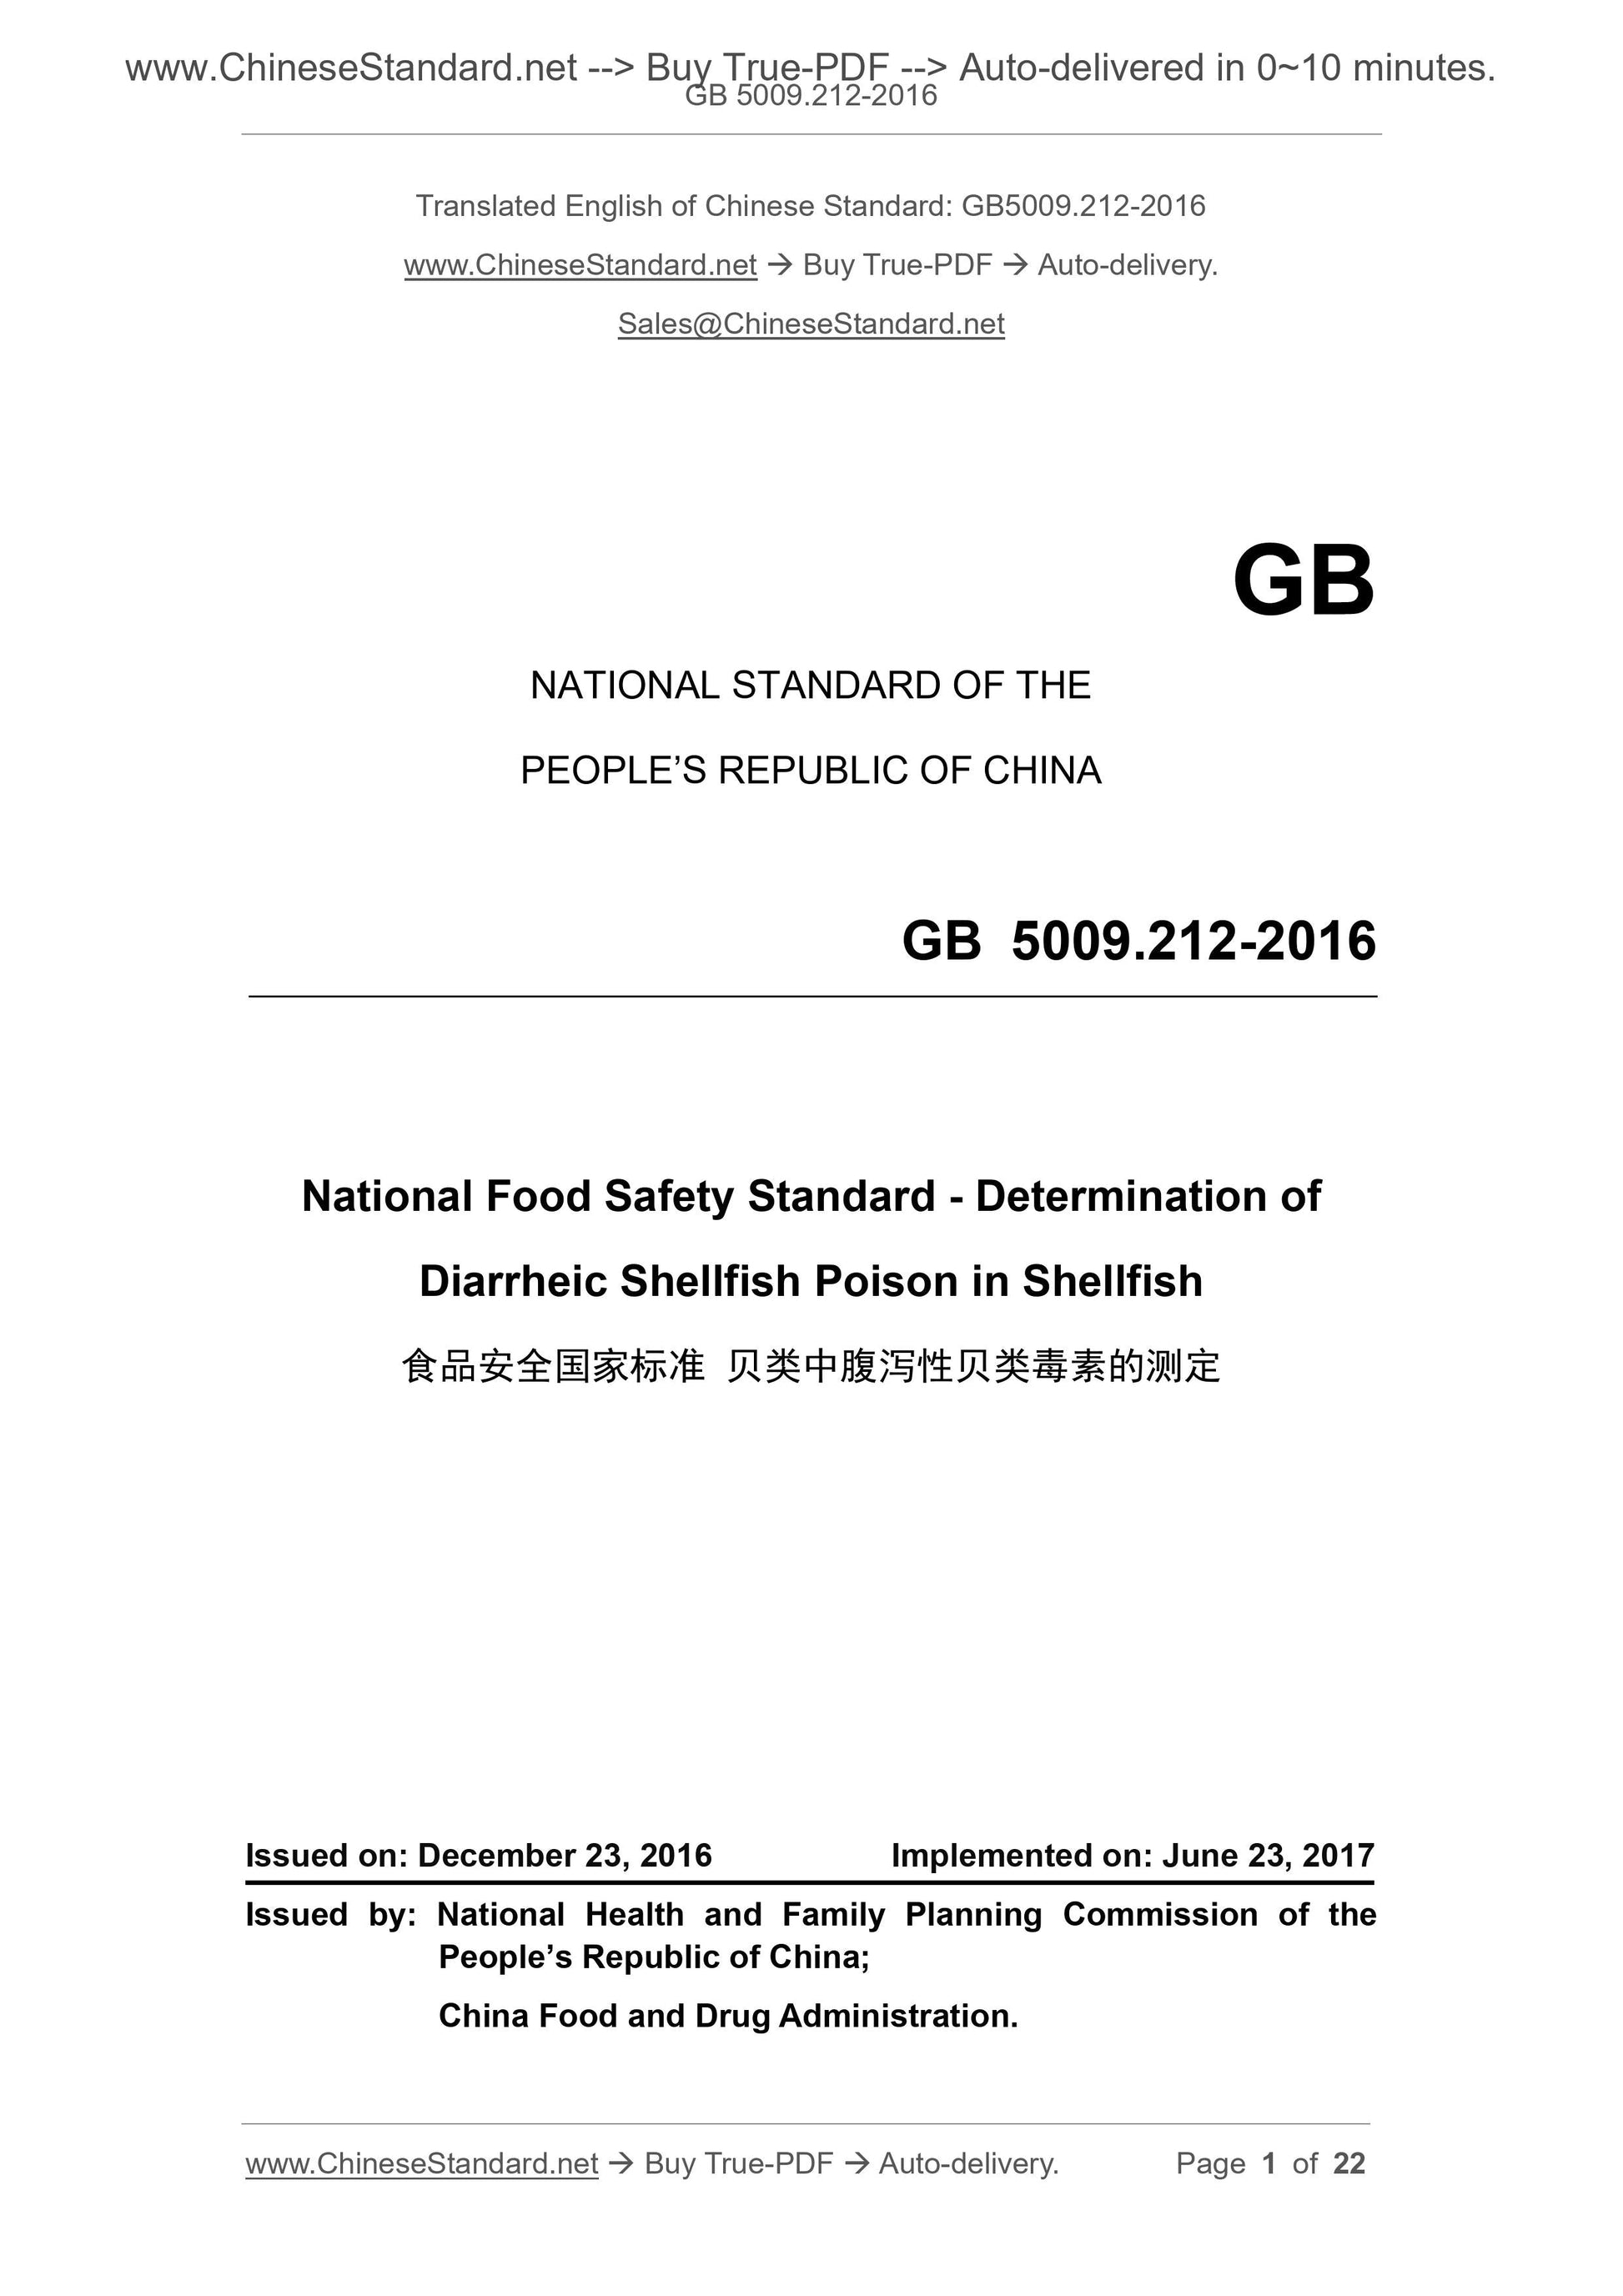 GB 5009.212-2016 Page 1